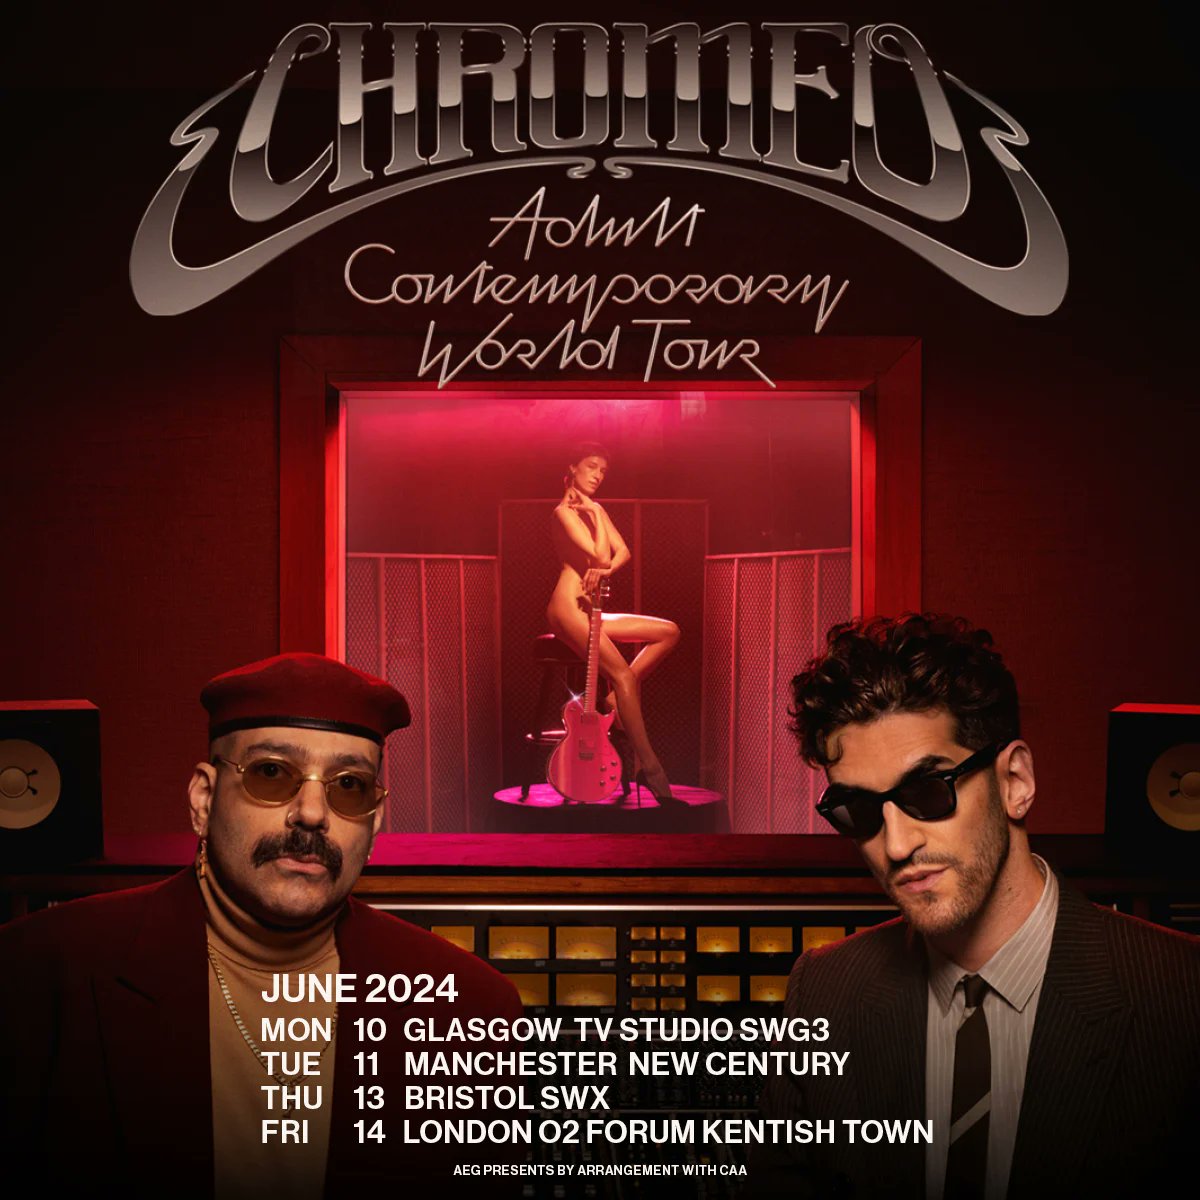 Chromeo Adult Contemporary World Tour at O2 Forum Kentish Town Tickets